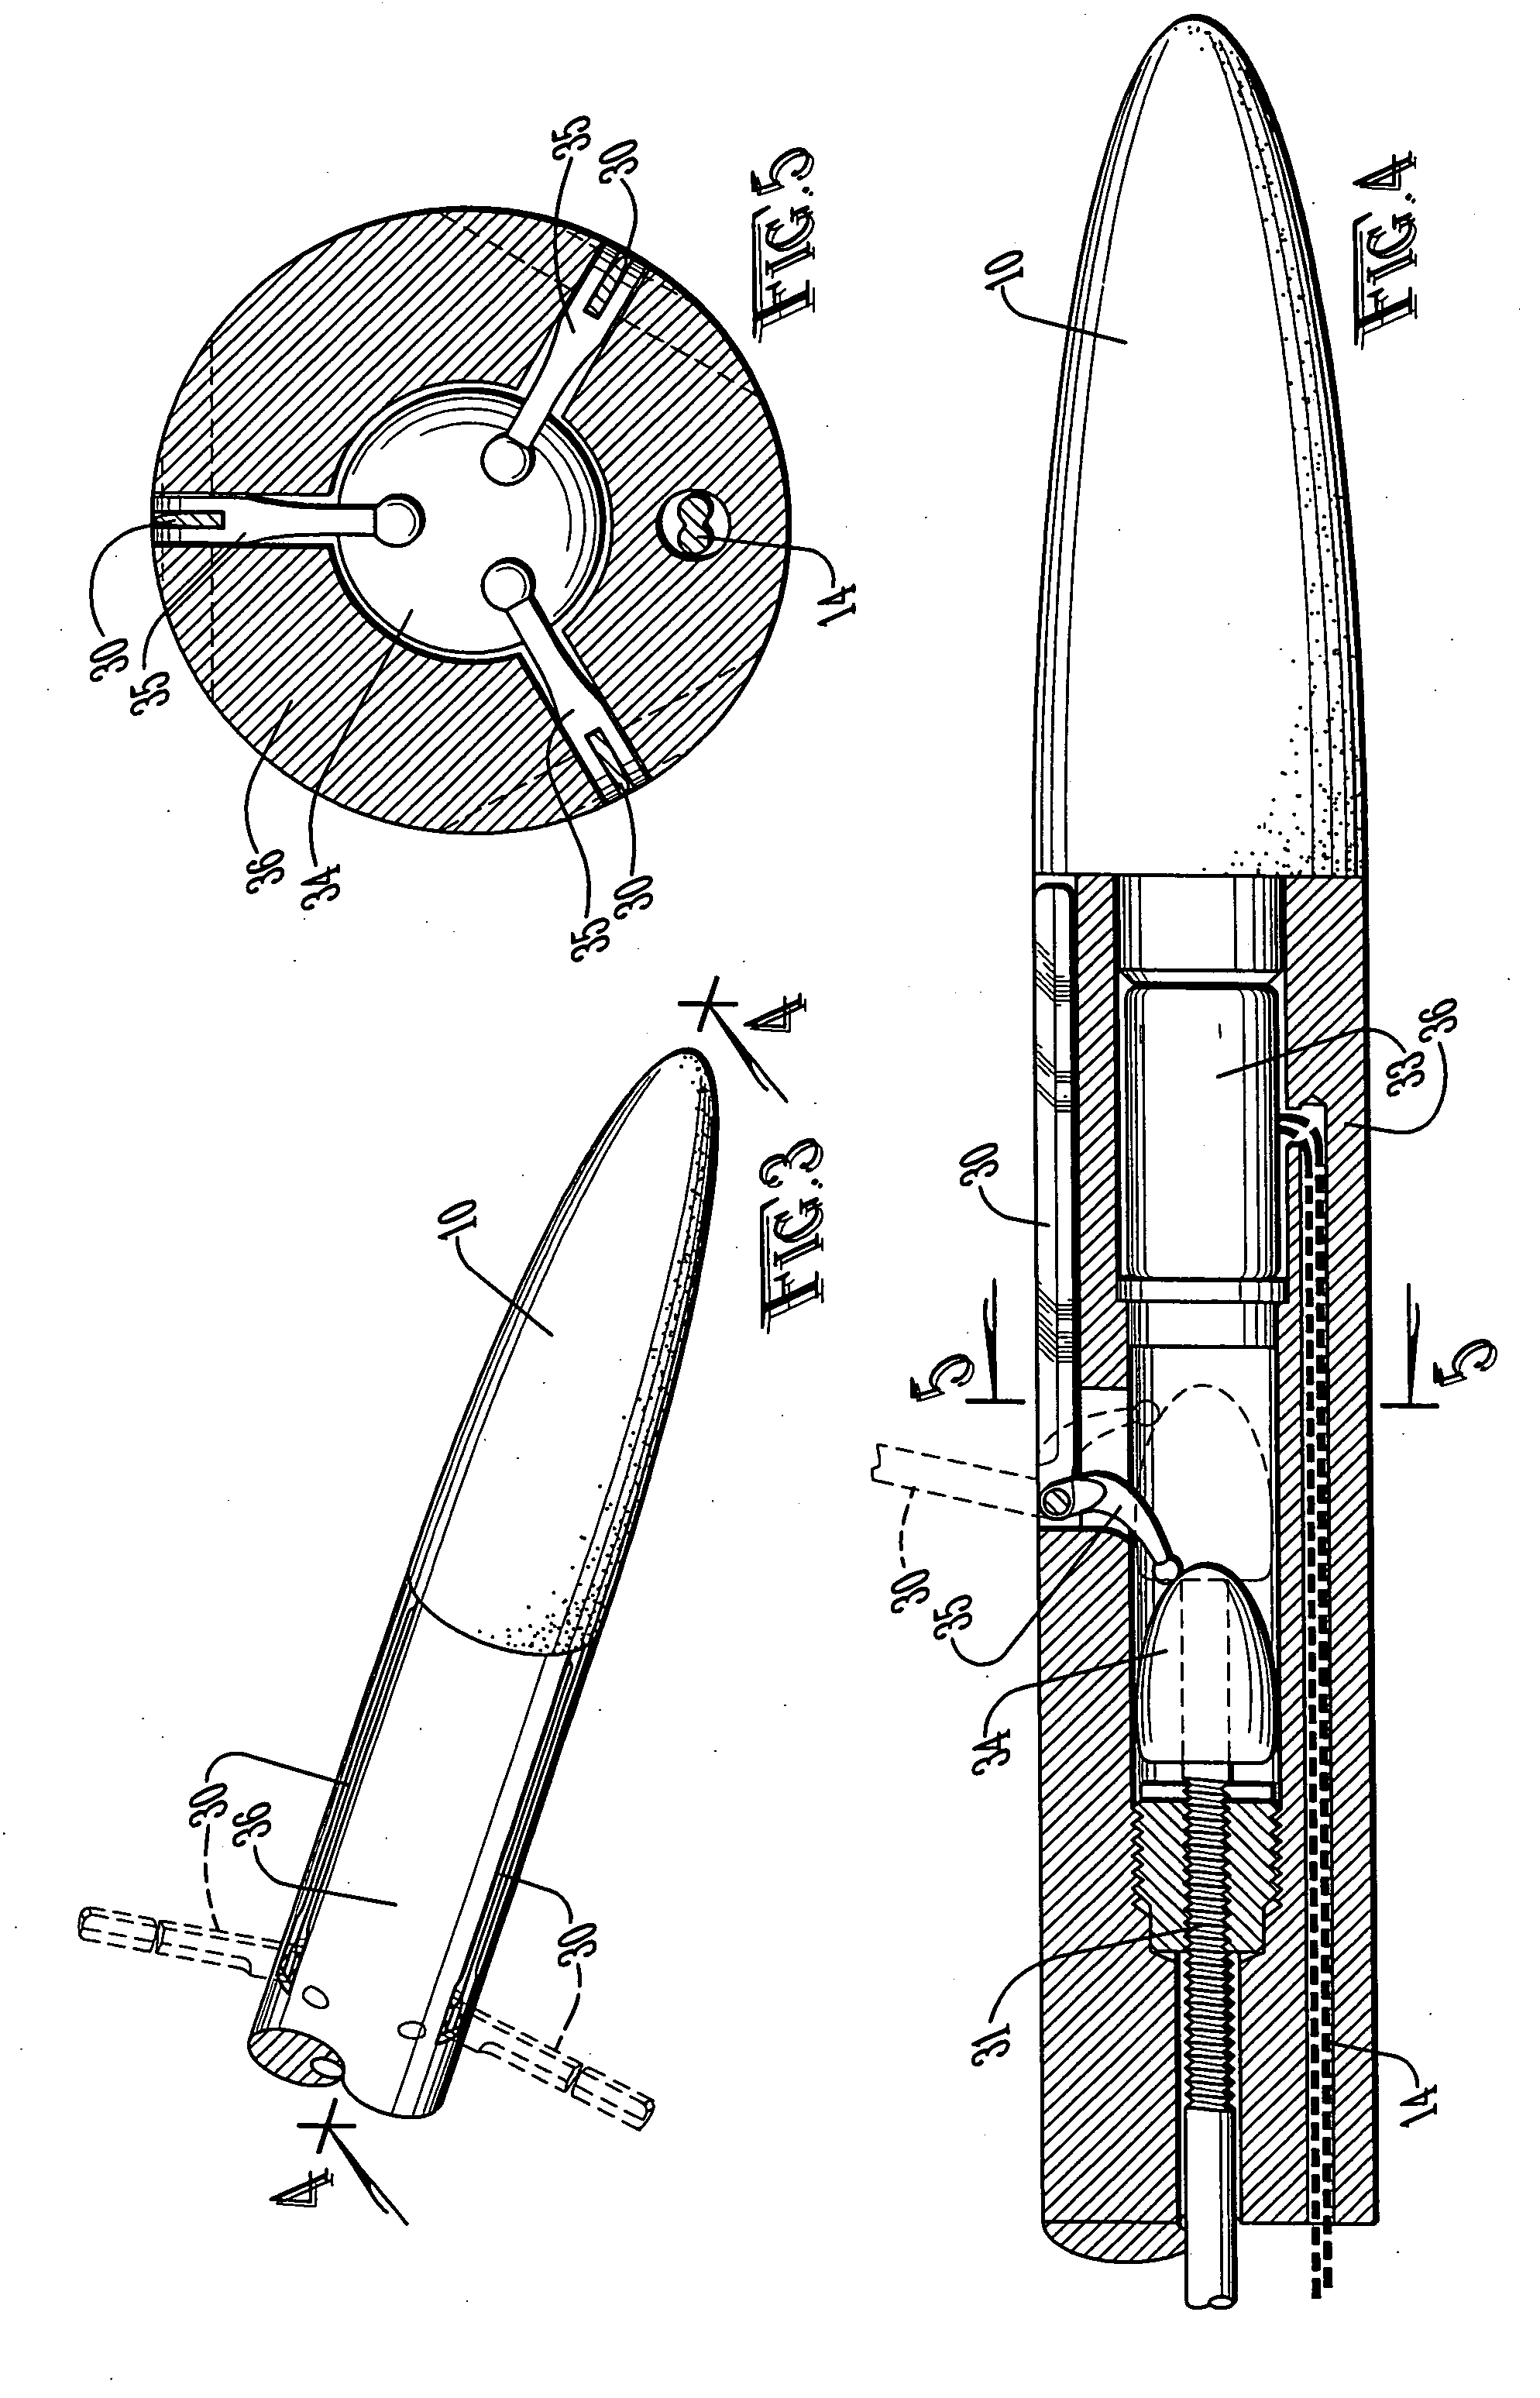 Conductive interstitial thermal therapy device